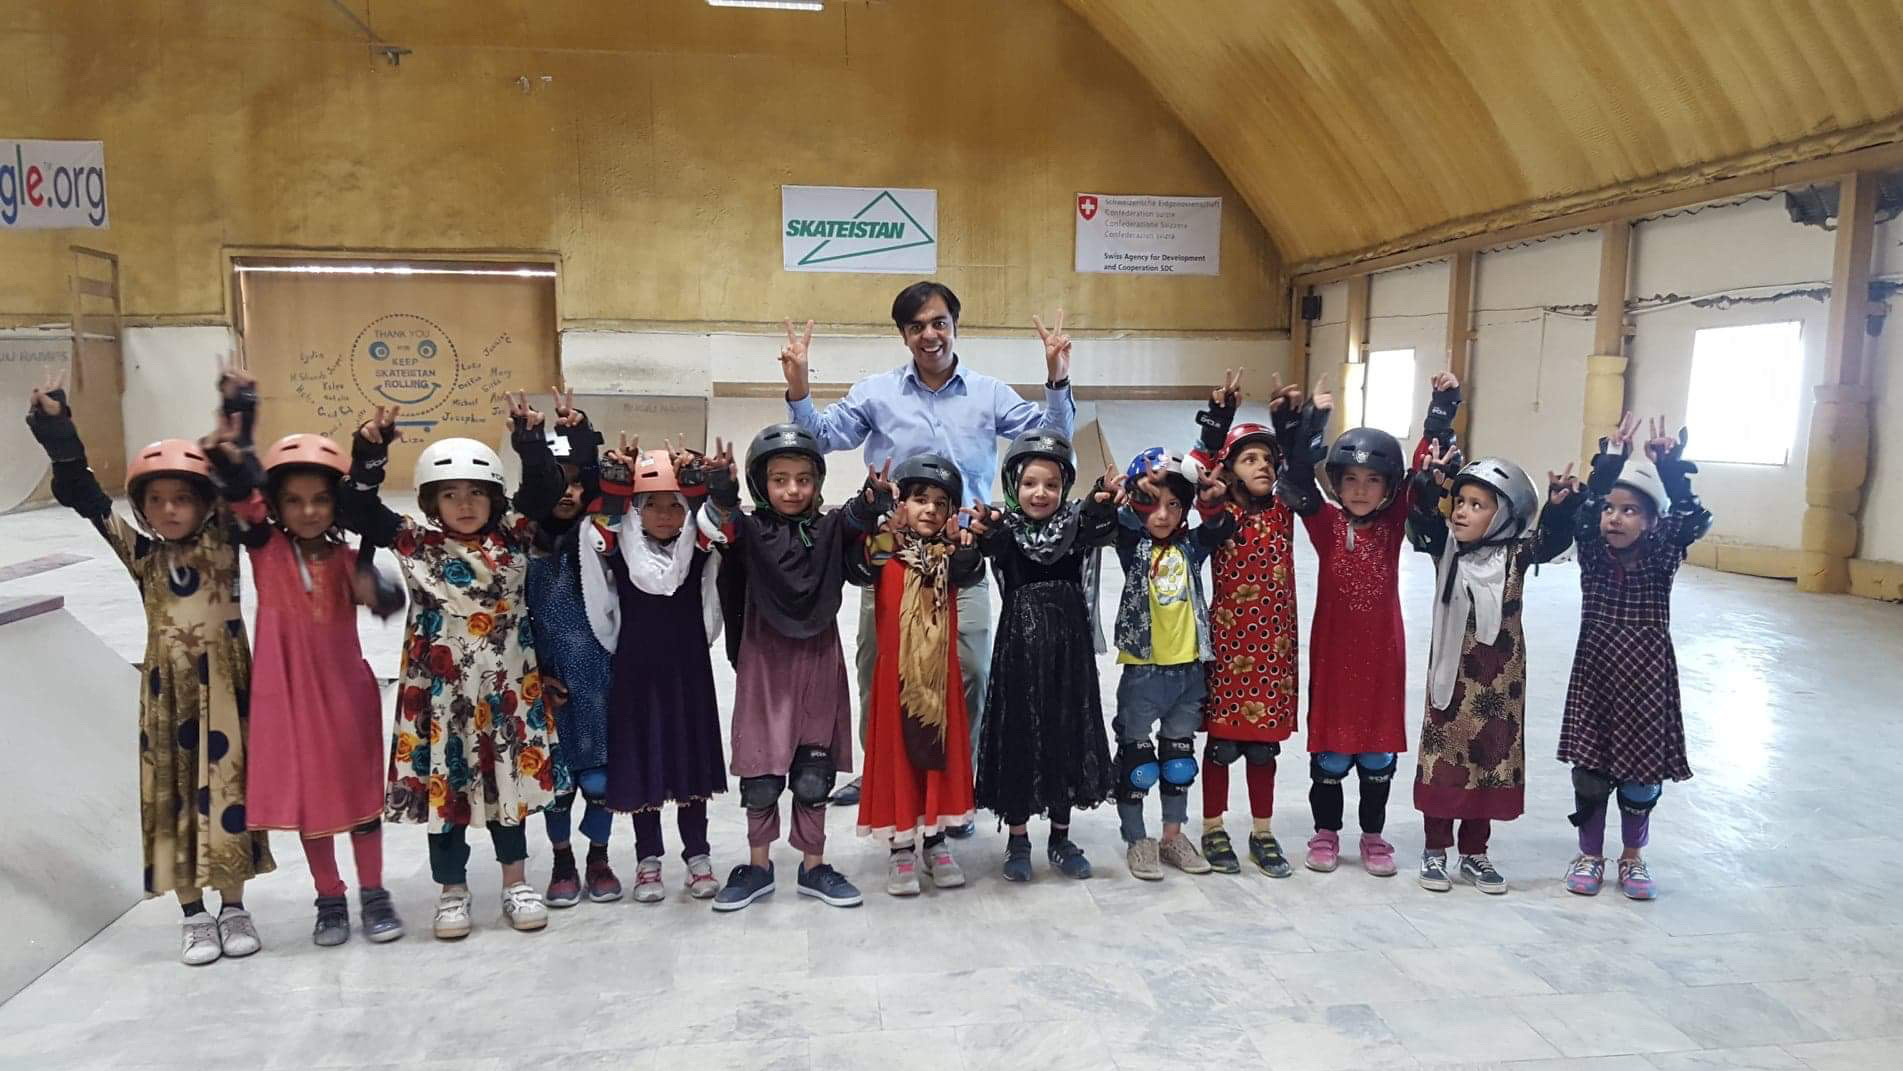 Soroush Kazemi with young girls in helmets and elbow pads, putting their arms up with peace signs, at Skateistan